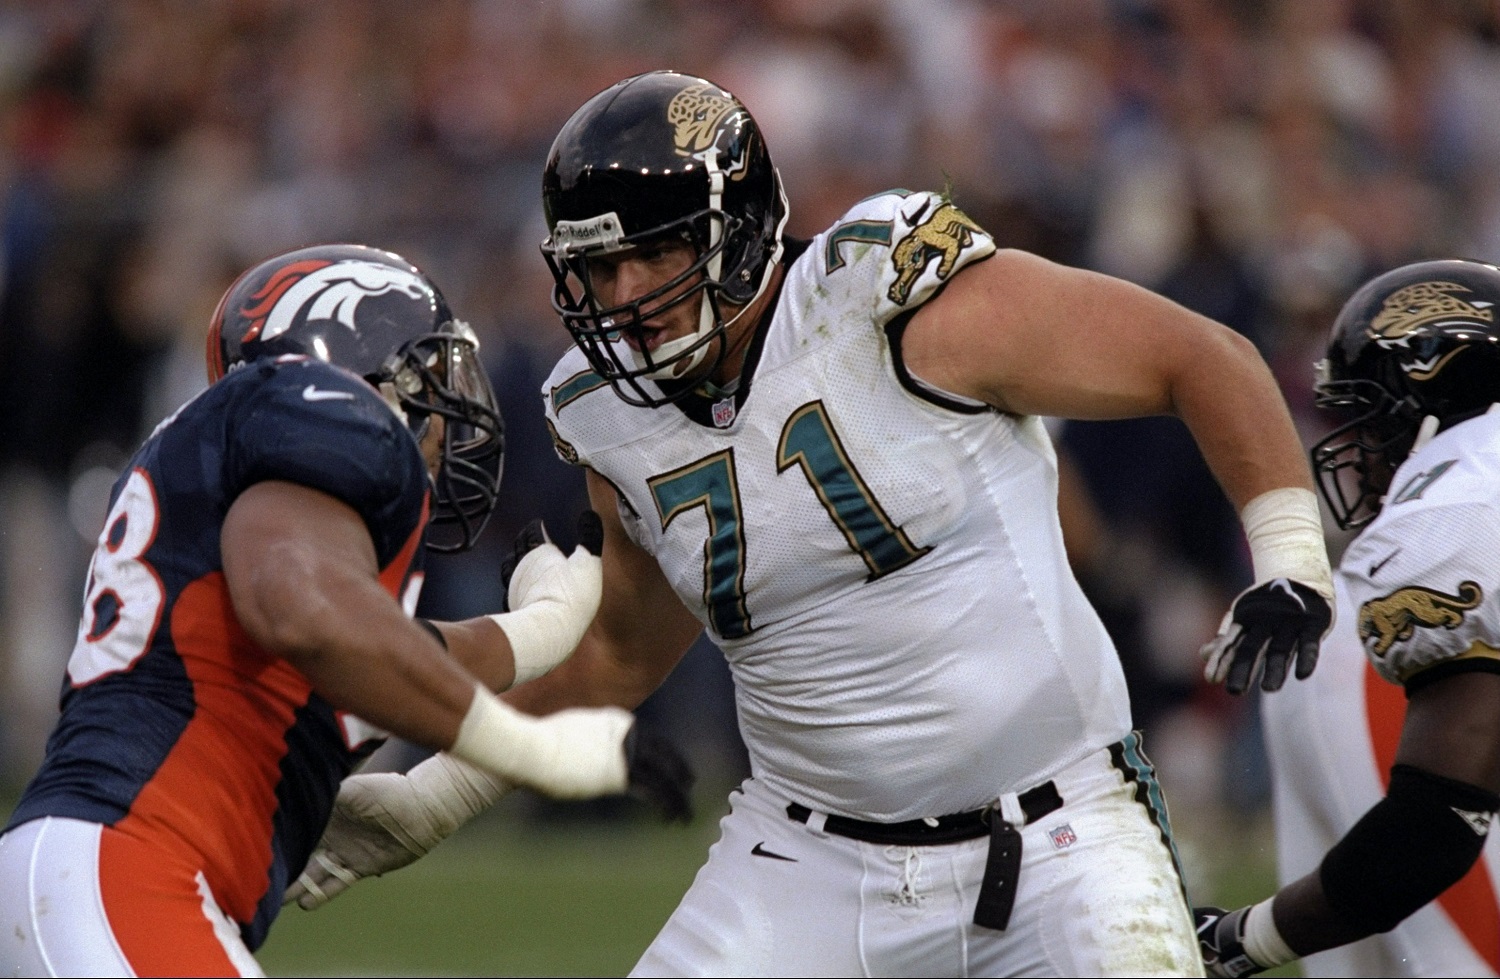 The Jacksonville Jaguars made Tony Boselli the first player they ever drafted. The stellar offensive lineman rewarded their faith with stellar play until injuries cut short his NFL career. | Getty Images